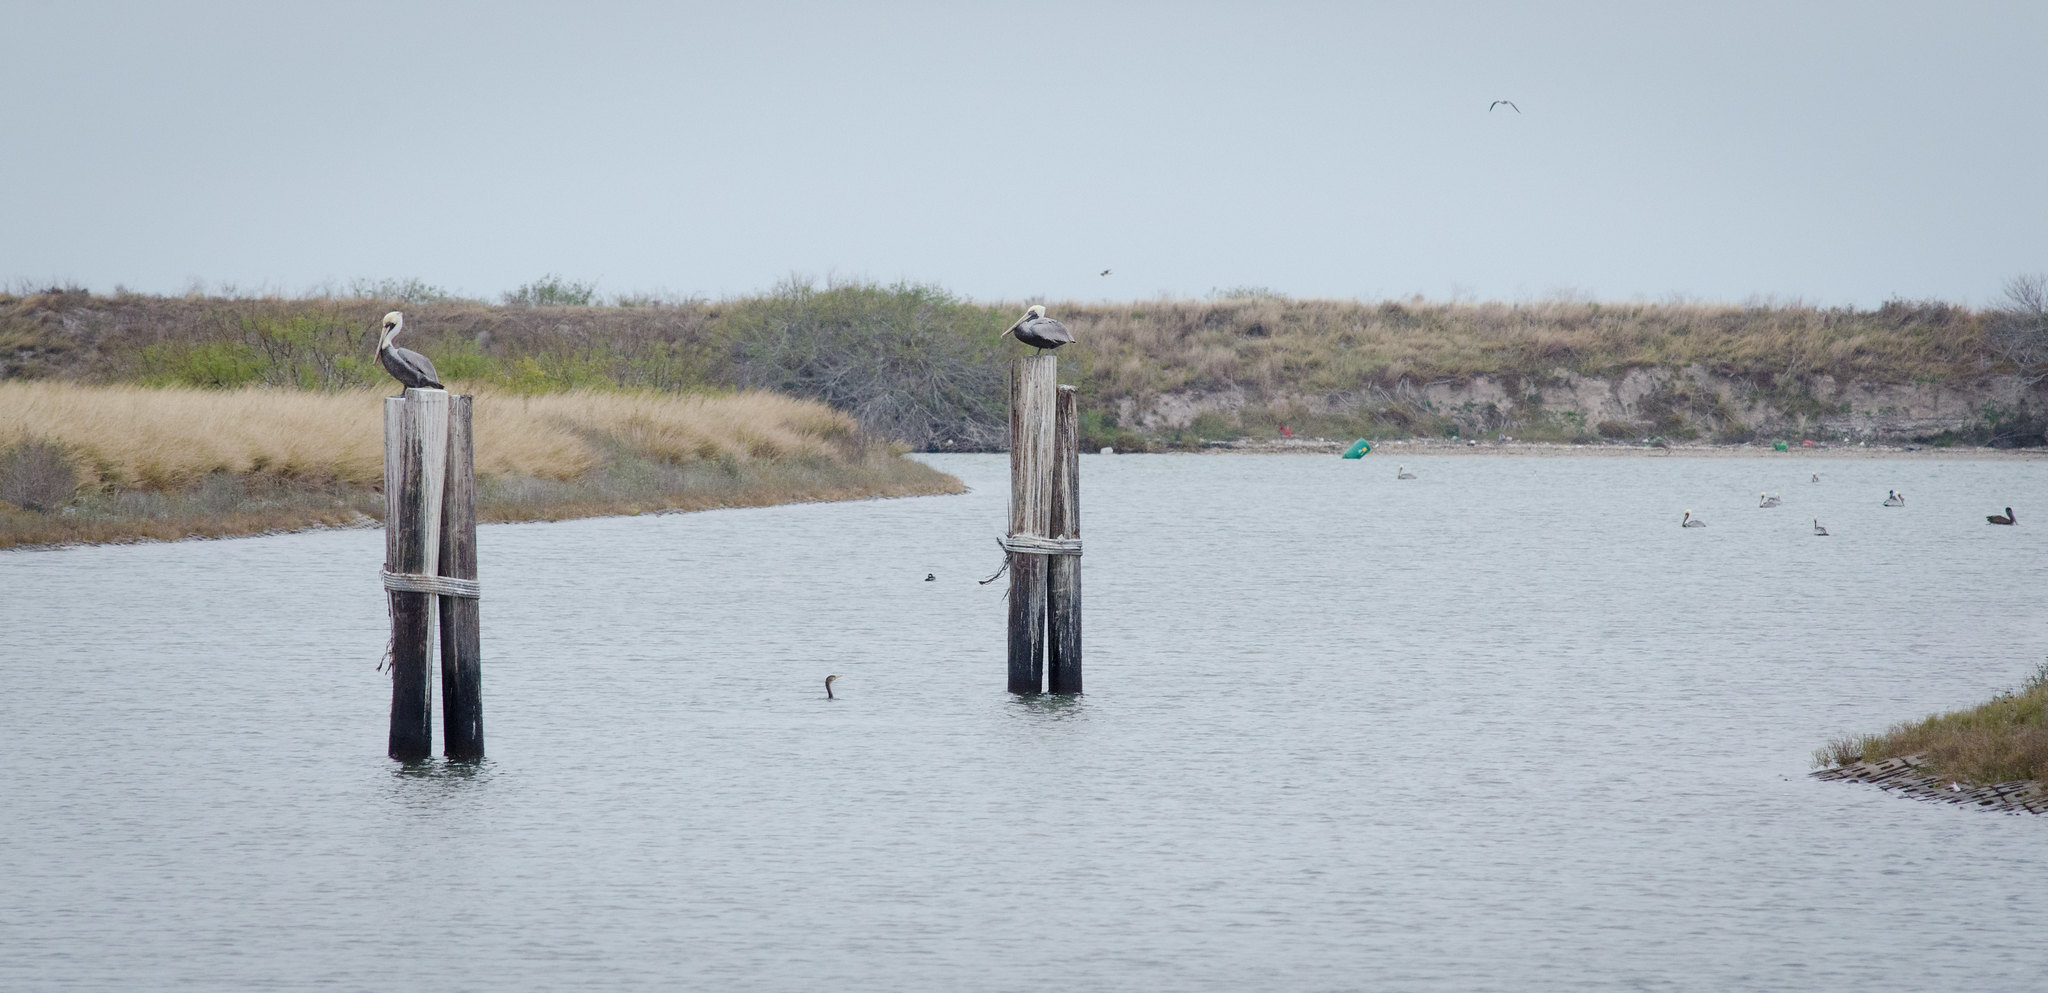 Pelicans sit on top of pilings in the gulf